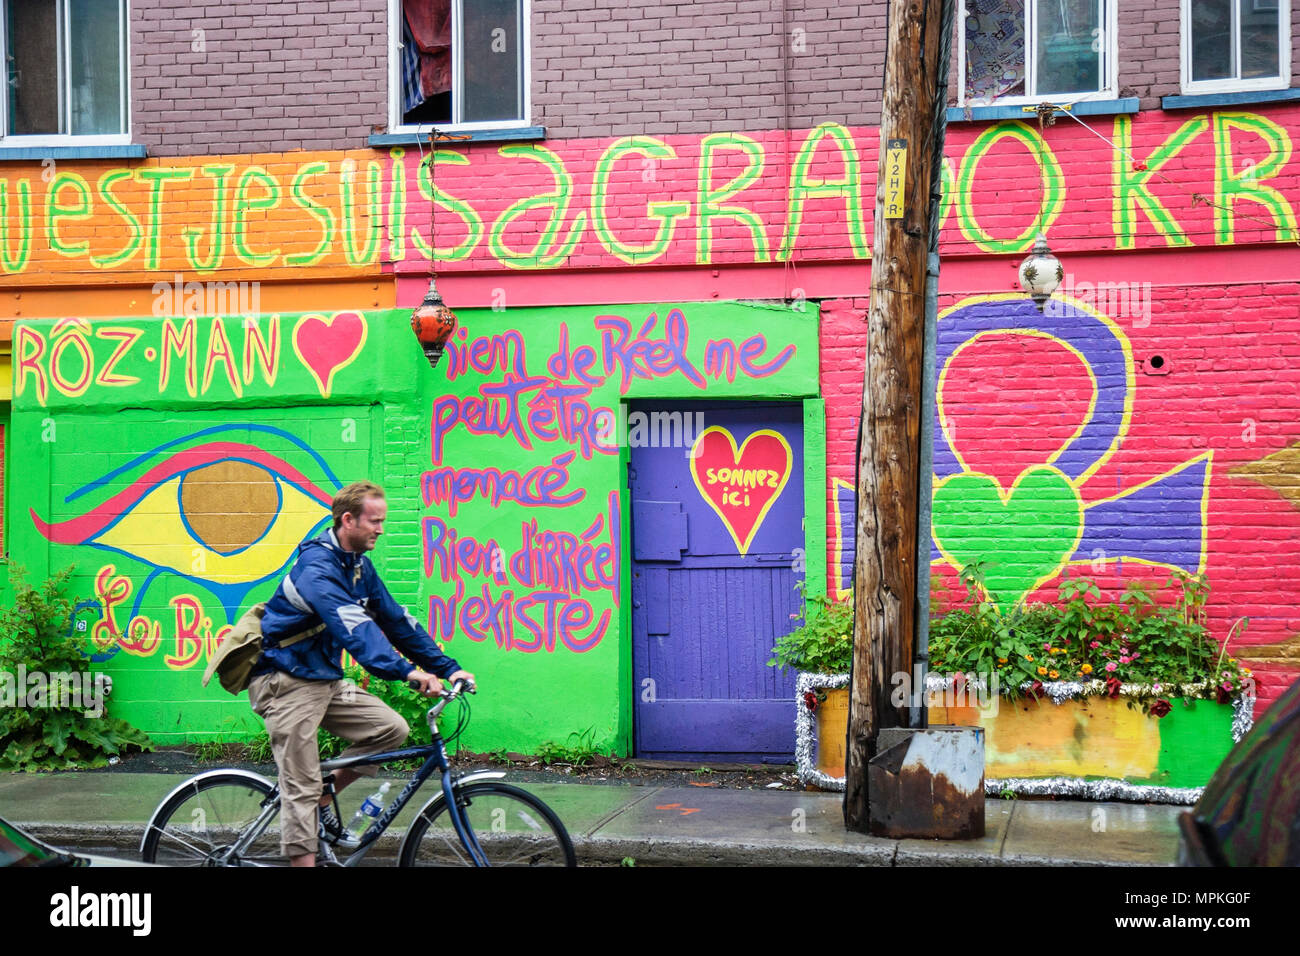 Montreal Canada,Quebec Province,Saint Catherine Street,gay,Le Village,painted walls,Hindu influenced,New Age,man men male,bicycle,bicycling,riding,bik Stock Photo